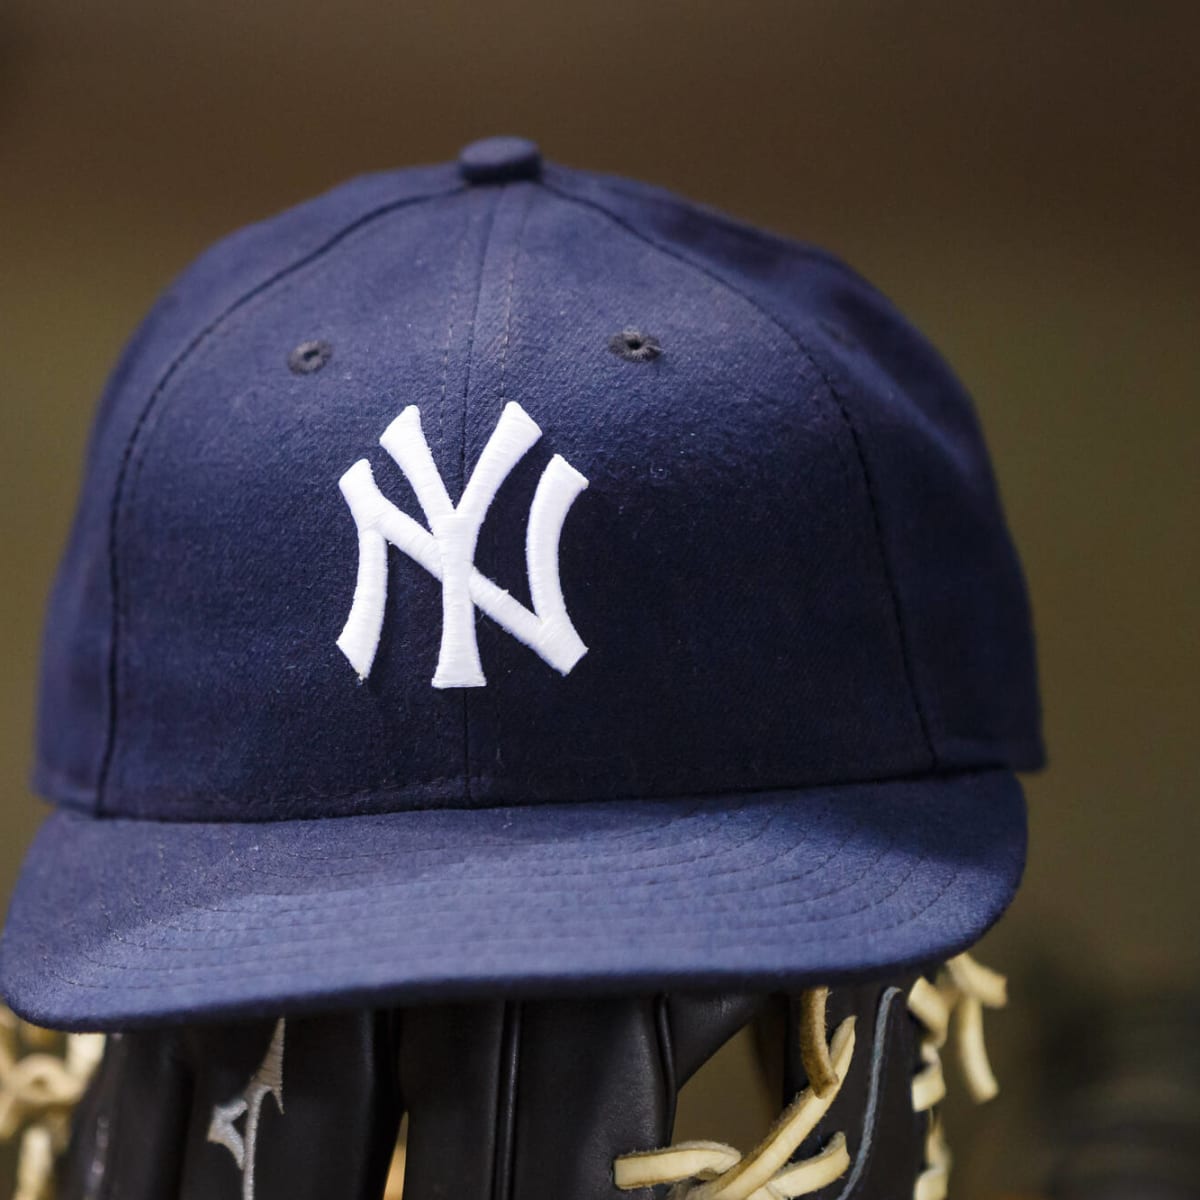 Yankees add Starr Insurance patch to uniforms 